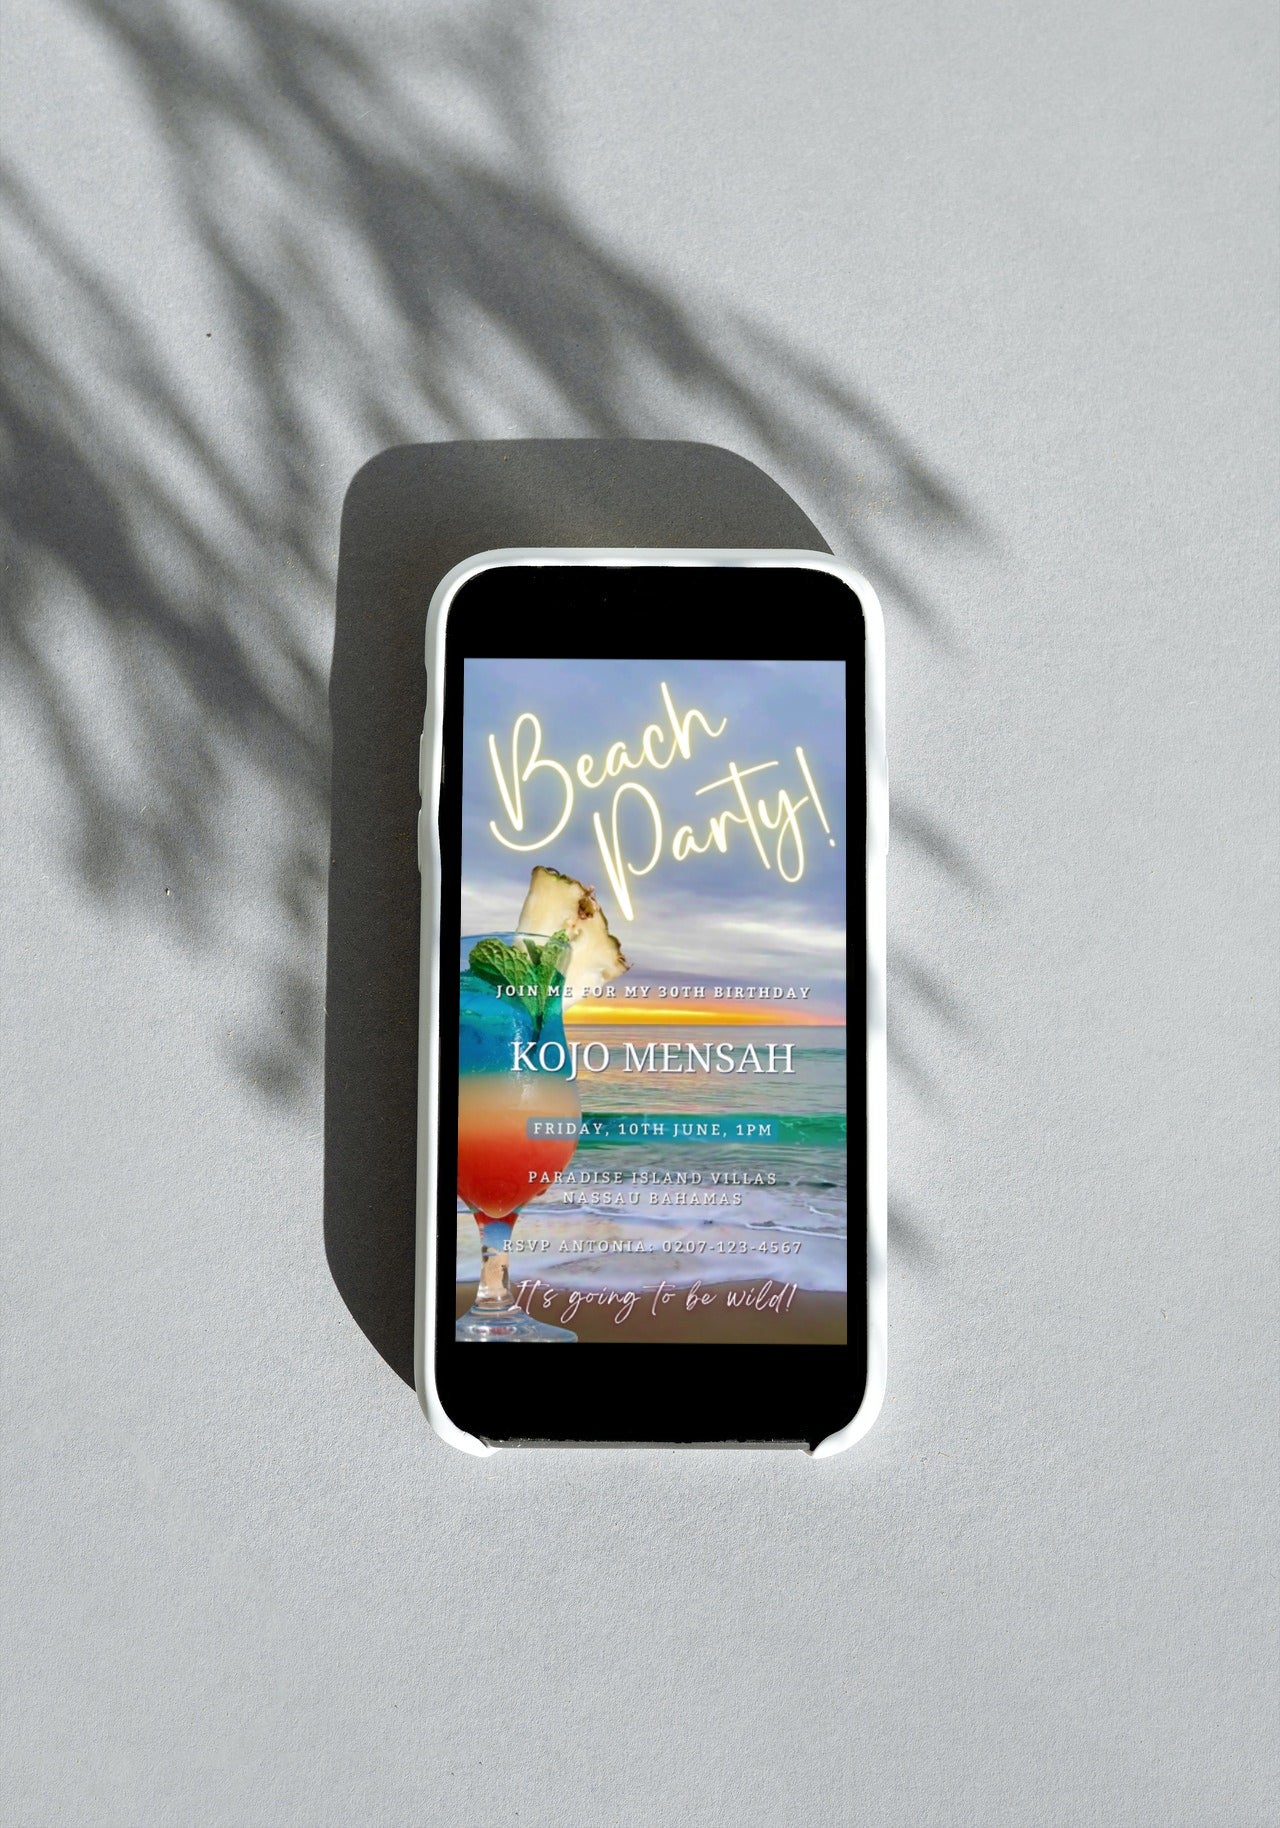 Smartphone displaying a customizable digital beach party video invitation with a cocktail image, available for personalizing and sharing via digital platforms.